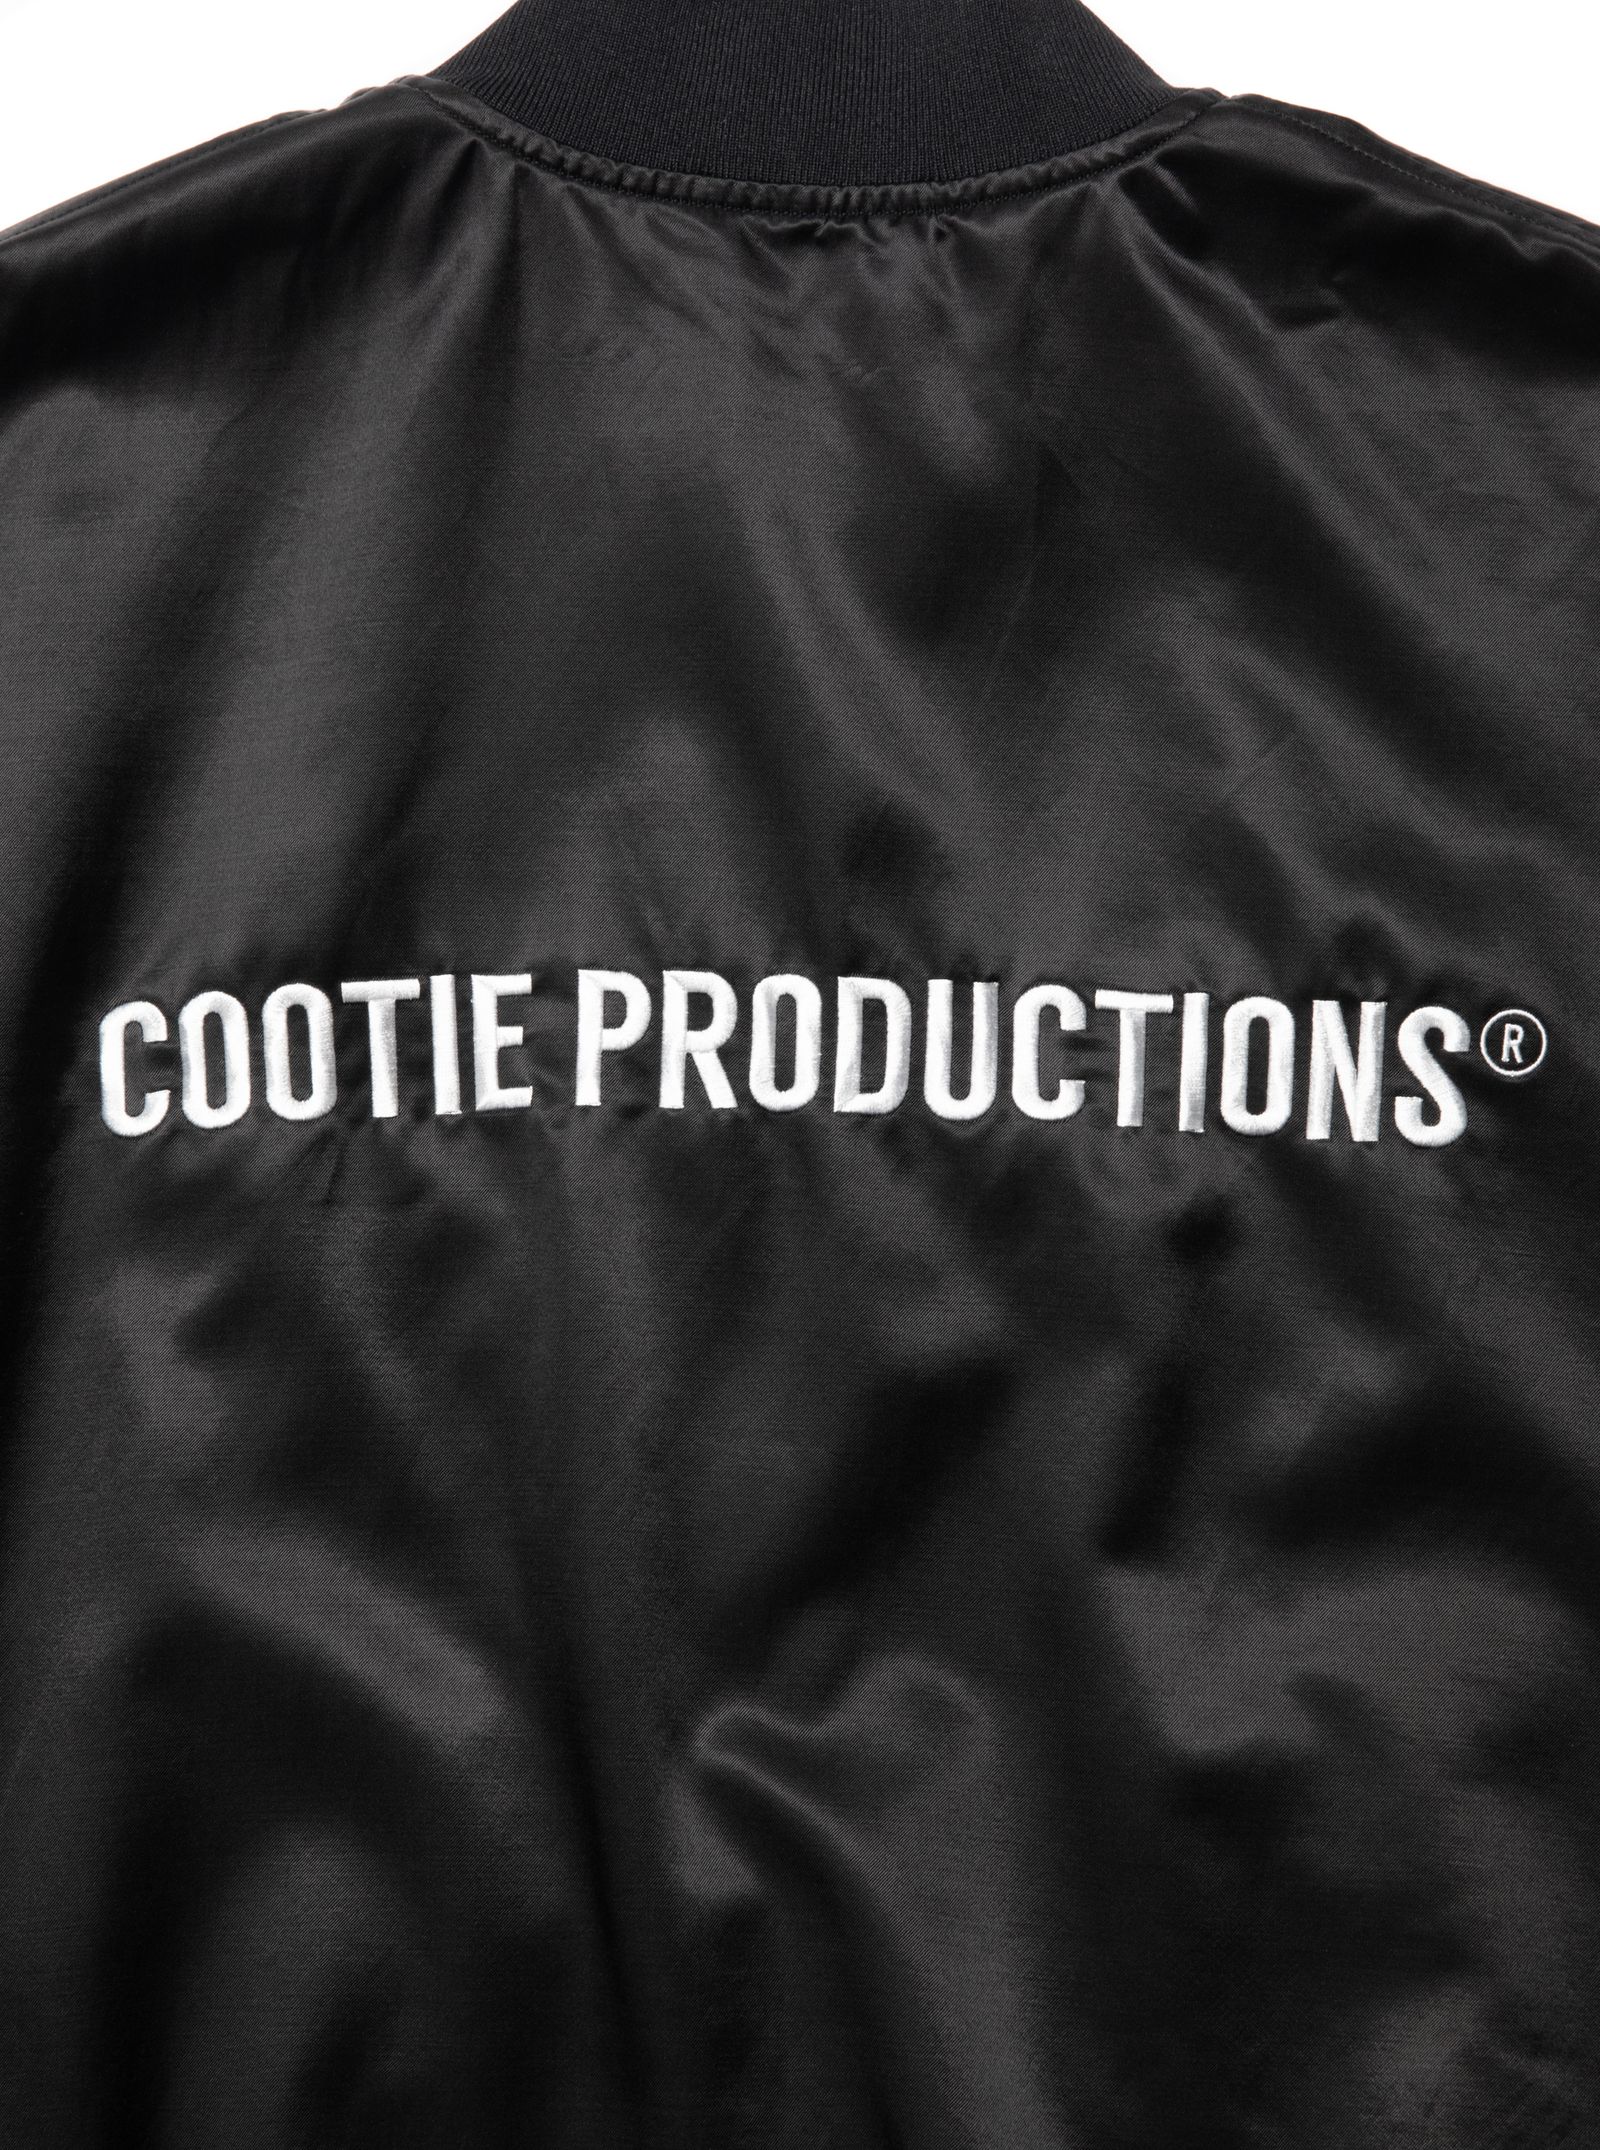 COOTIE PRODUCTIONS × Name